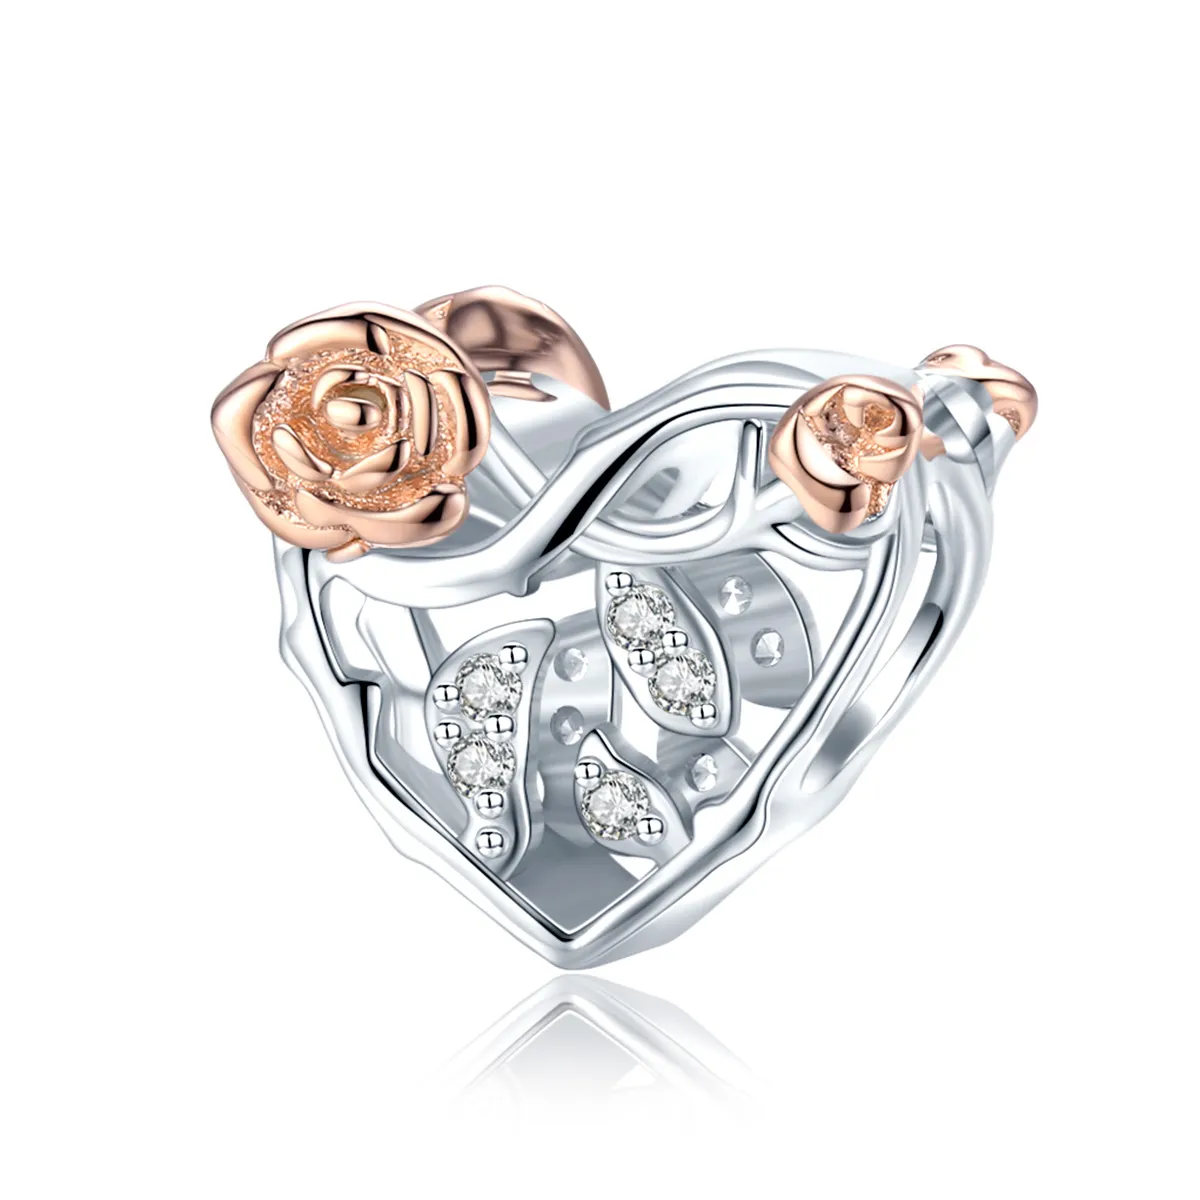 Pandora Style Two Tone Heart With Roses Charm - BSC280